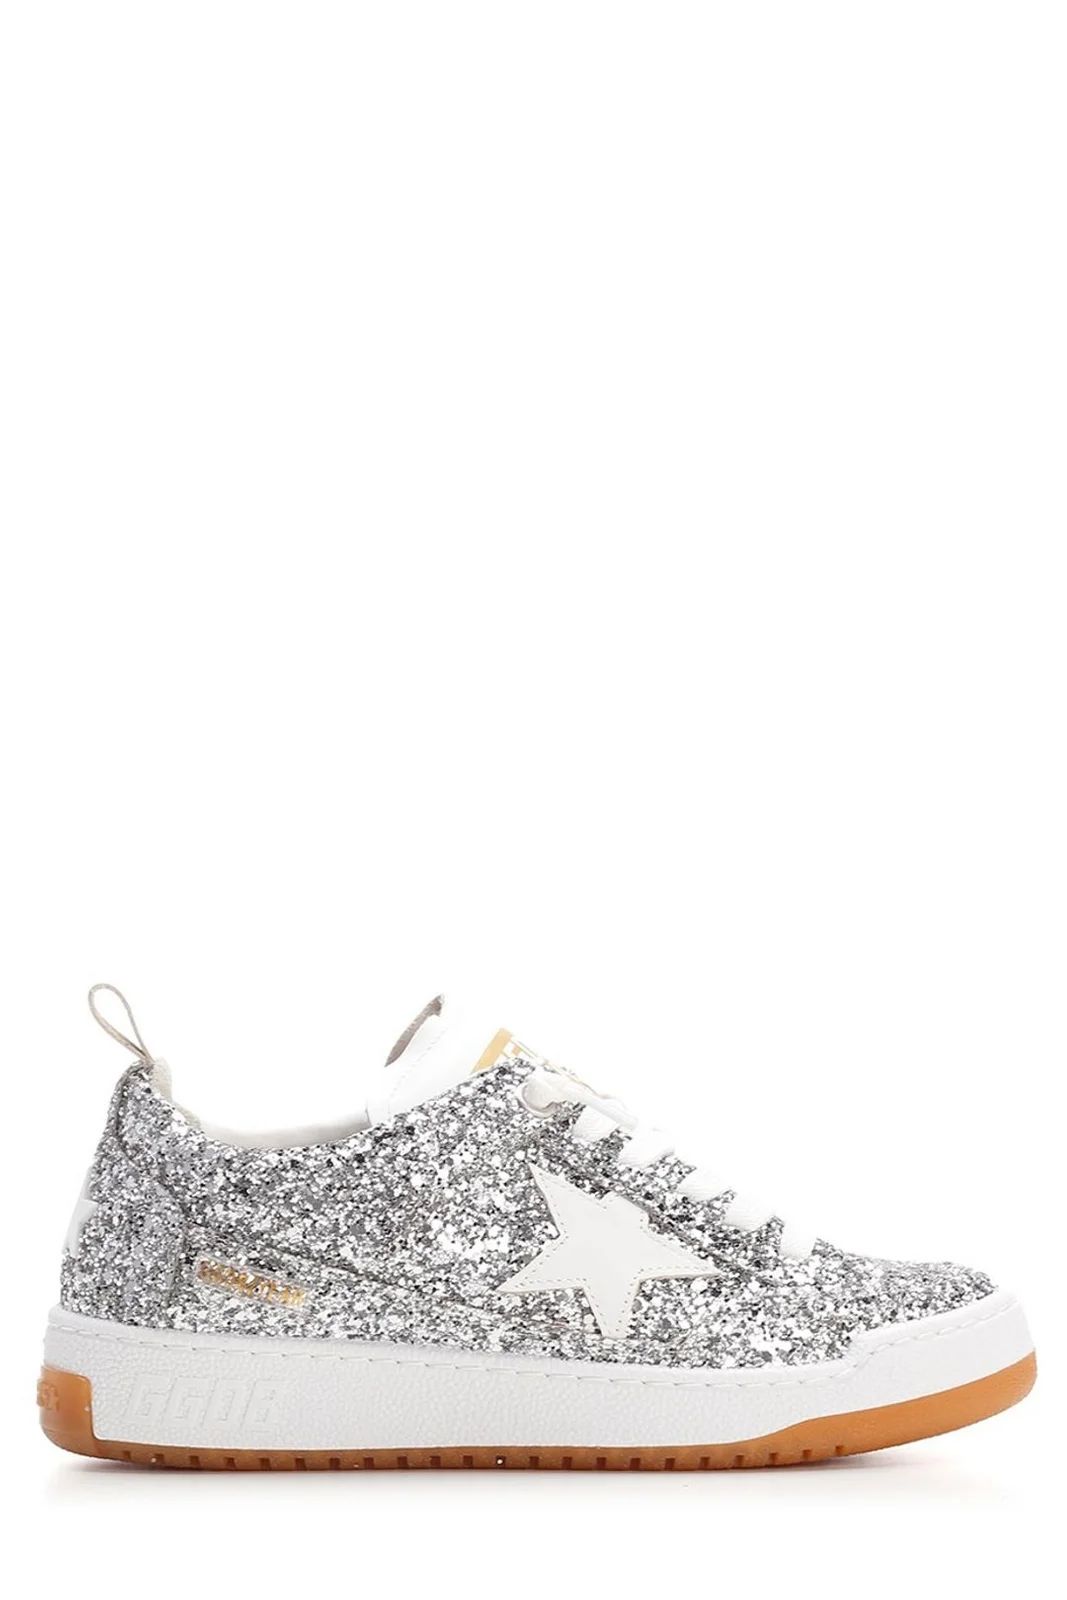 Golden Goose Deluxe Brand Yeah Lace-Up Sneakers | Cettire Global